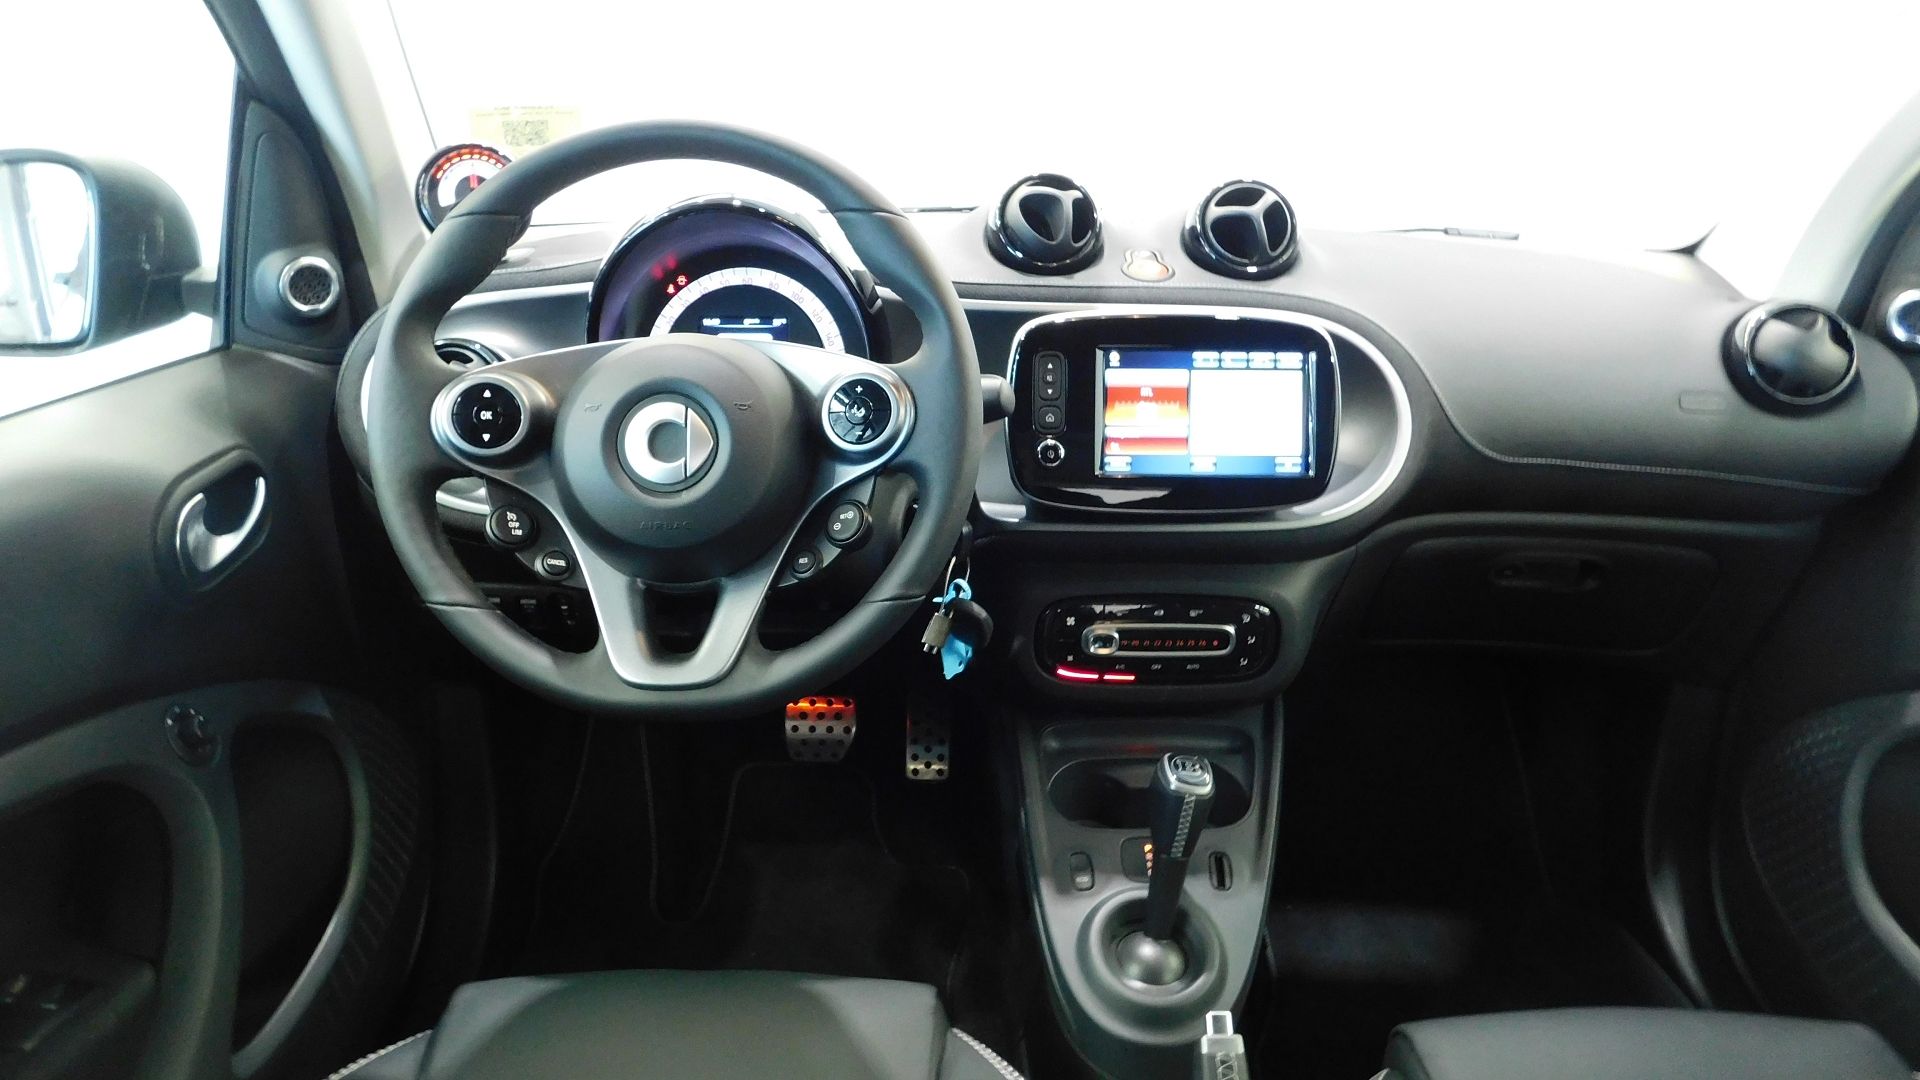 SMART FORTWO COUPE ELECTRIQUE 82CH BRABUS STYLE